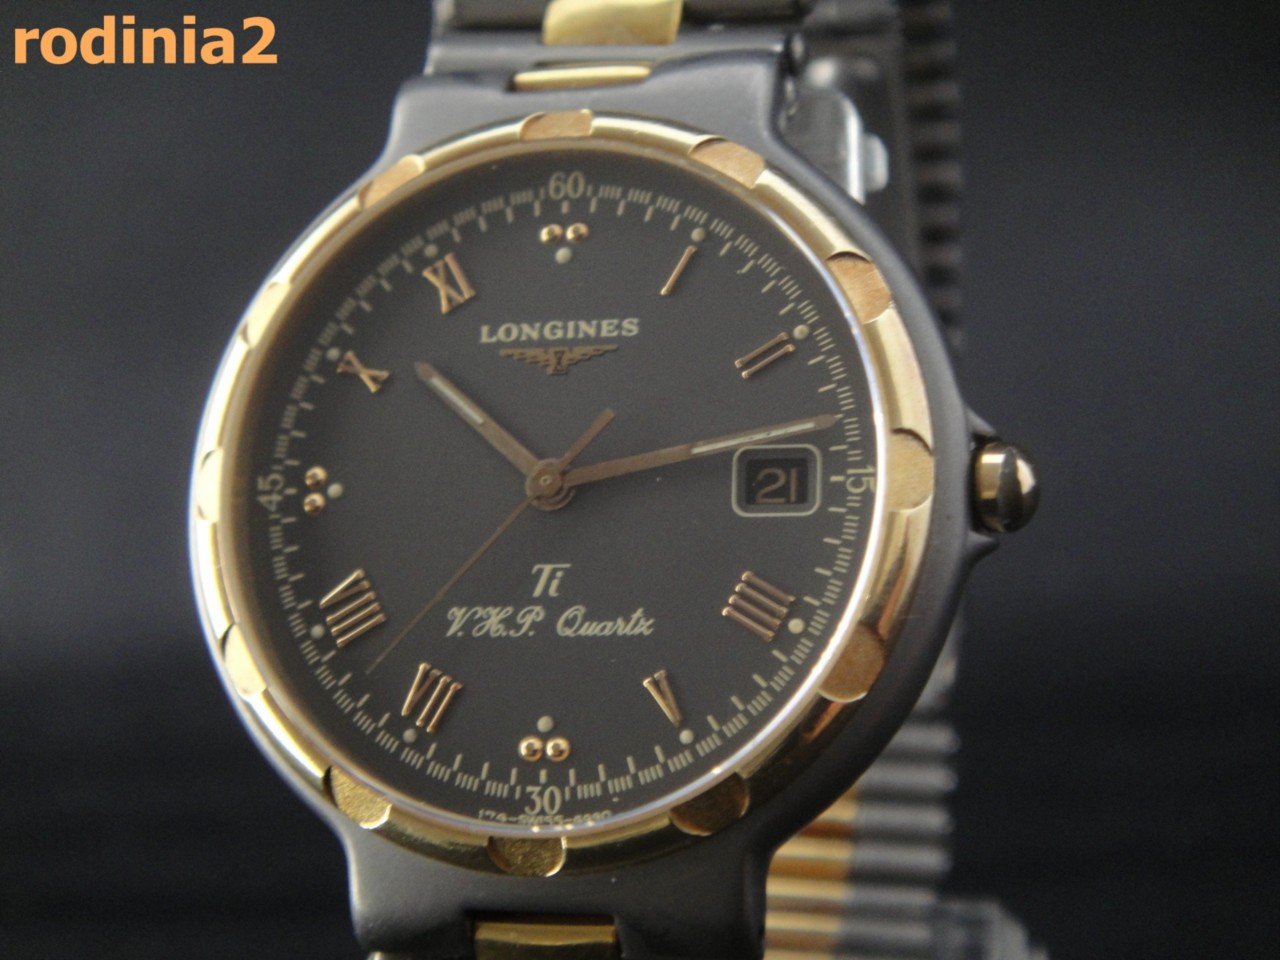 The history of the Longines VHP